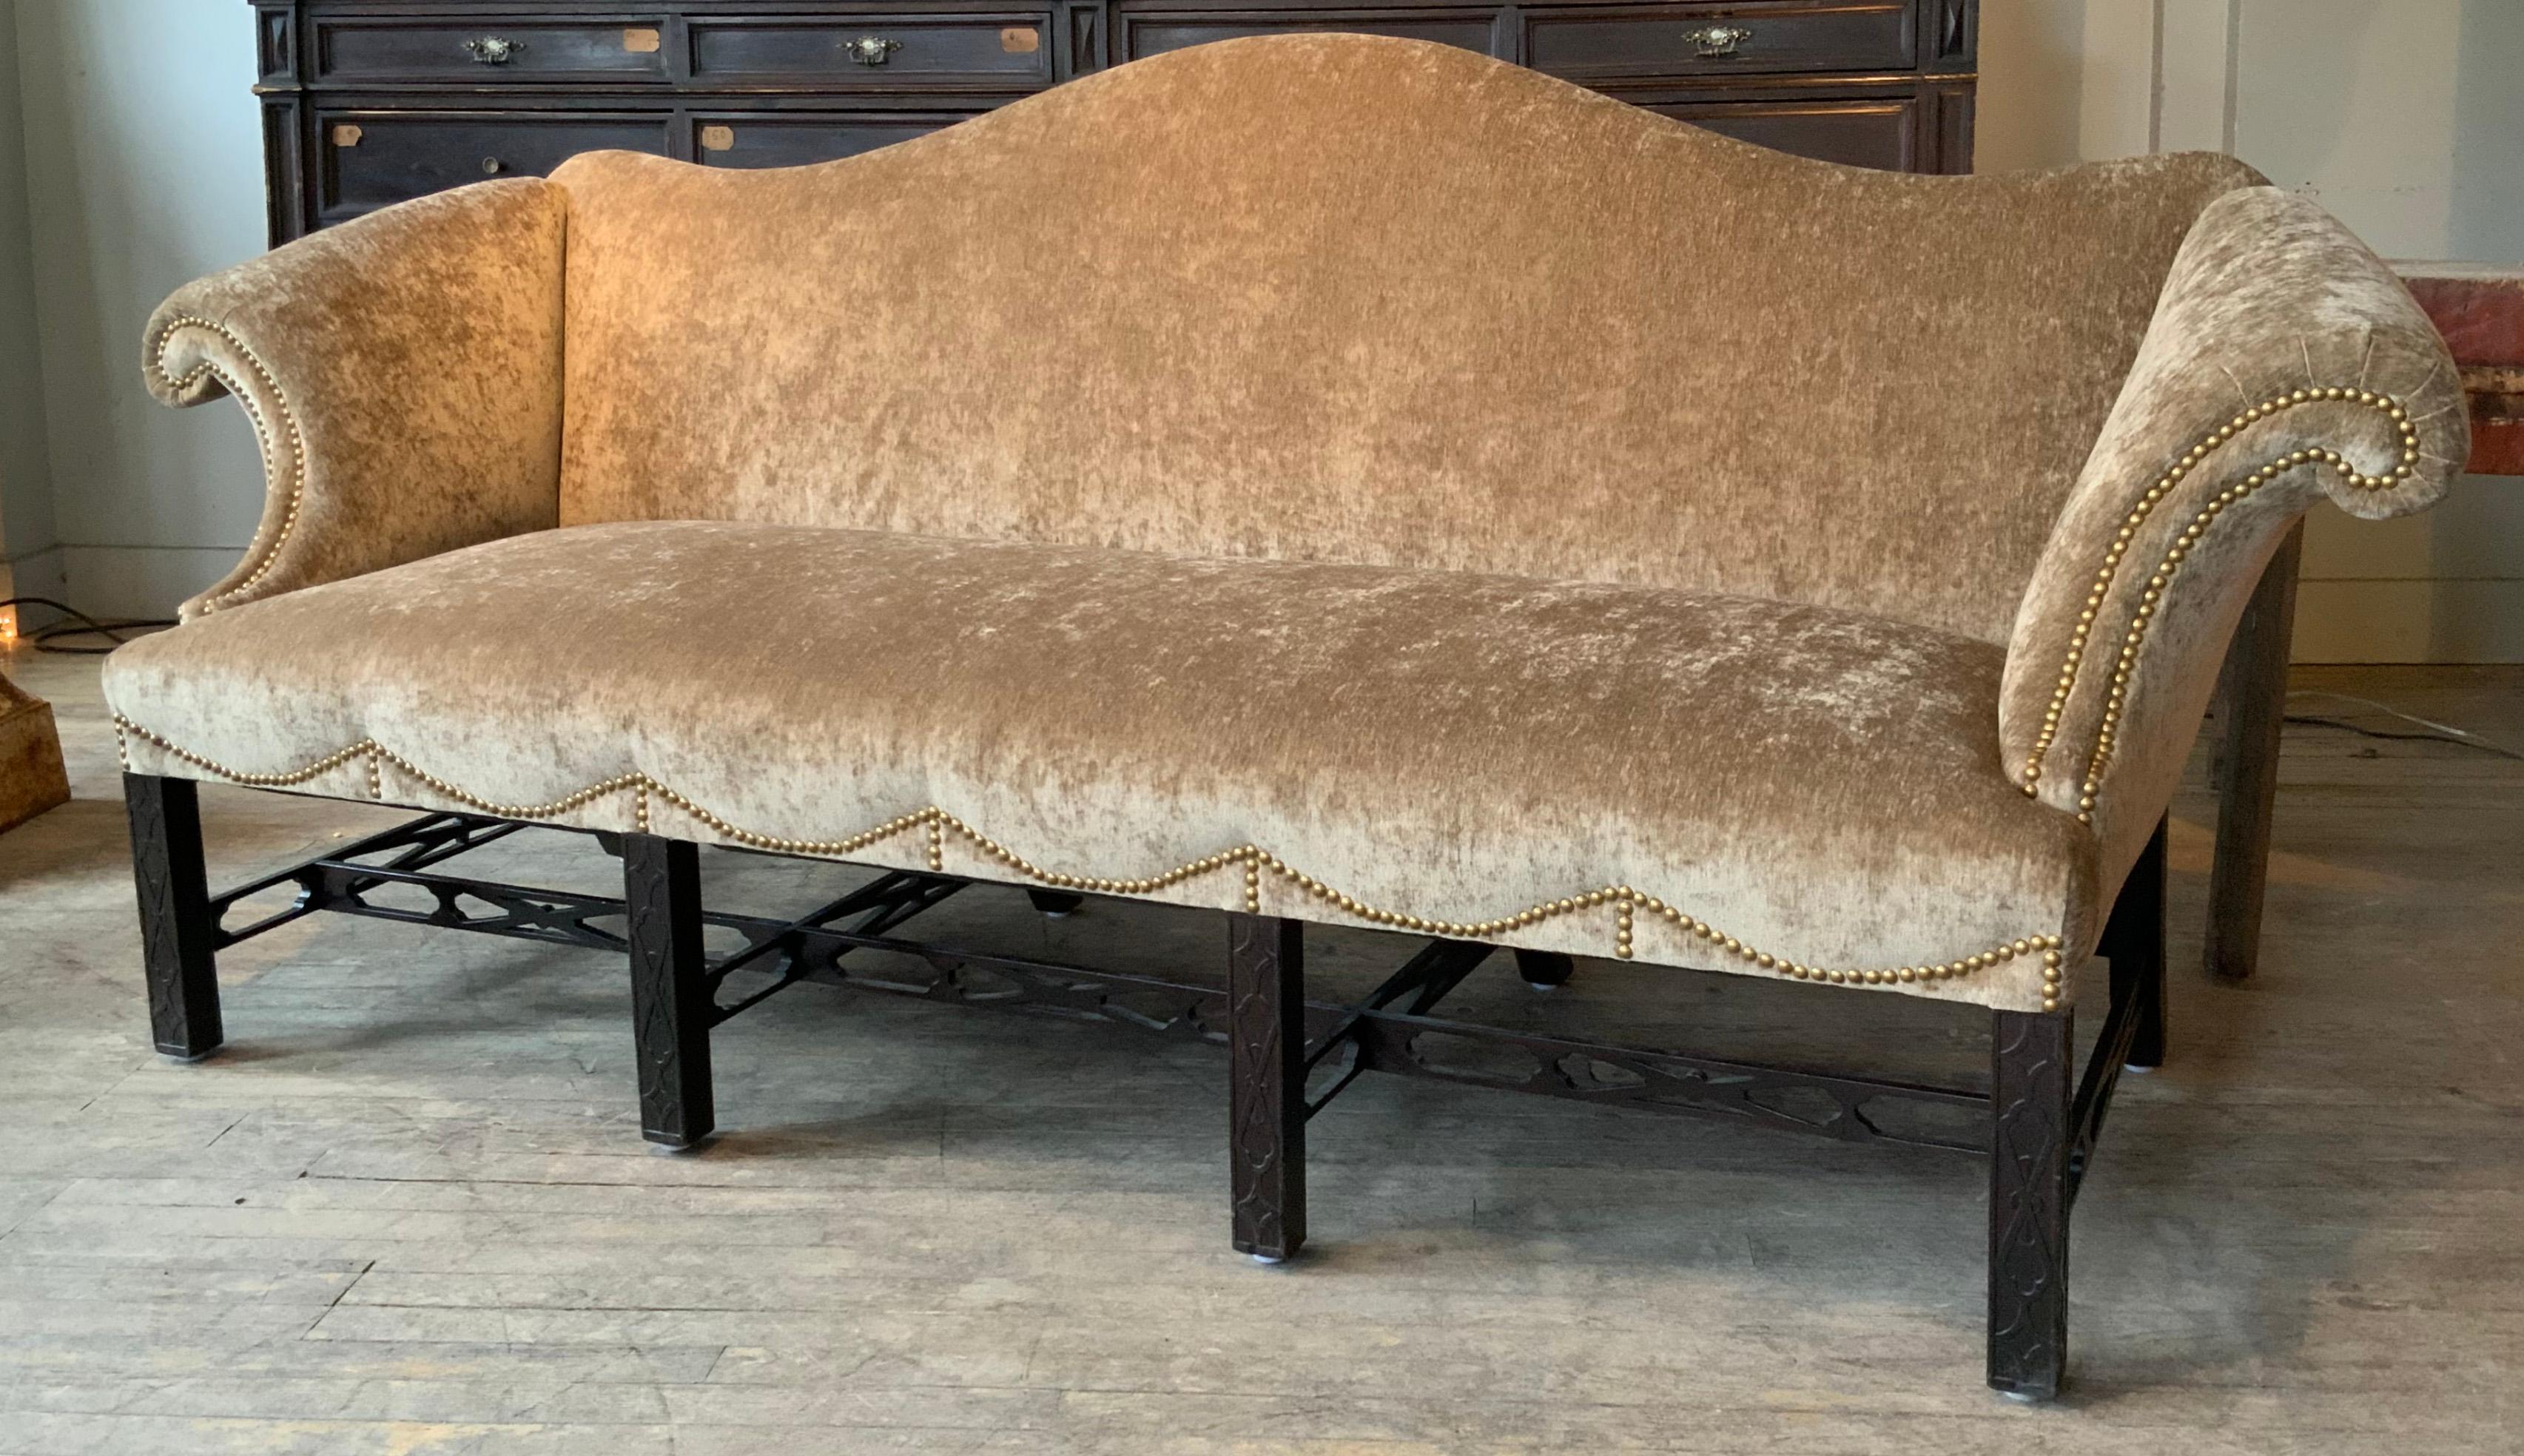 A beautiful 1920s Camelback sofa, just reupholstered in an elegant Beige cut velvet. the sofa has wonderful curved arms and a graceful camelback shape. the base is detailed in a Classic Chinese Chippendale style, with open fretwork stretchers.